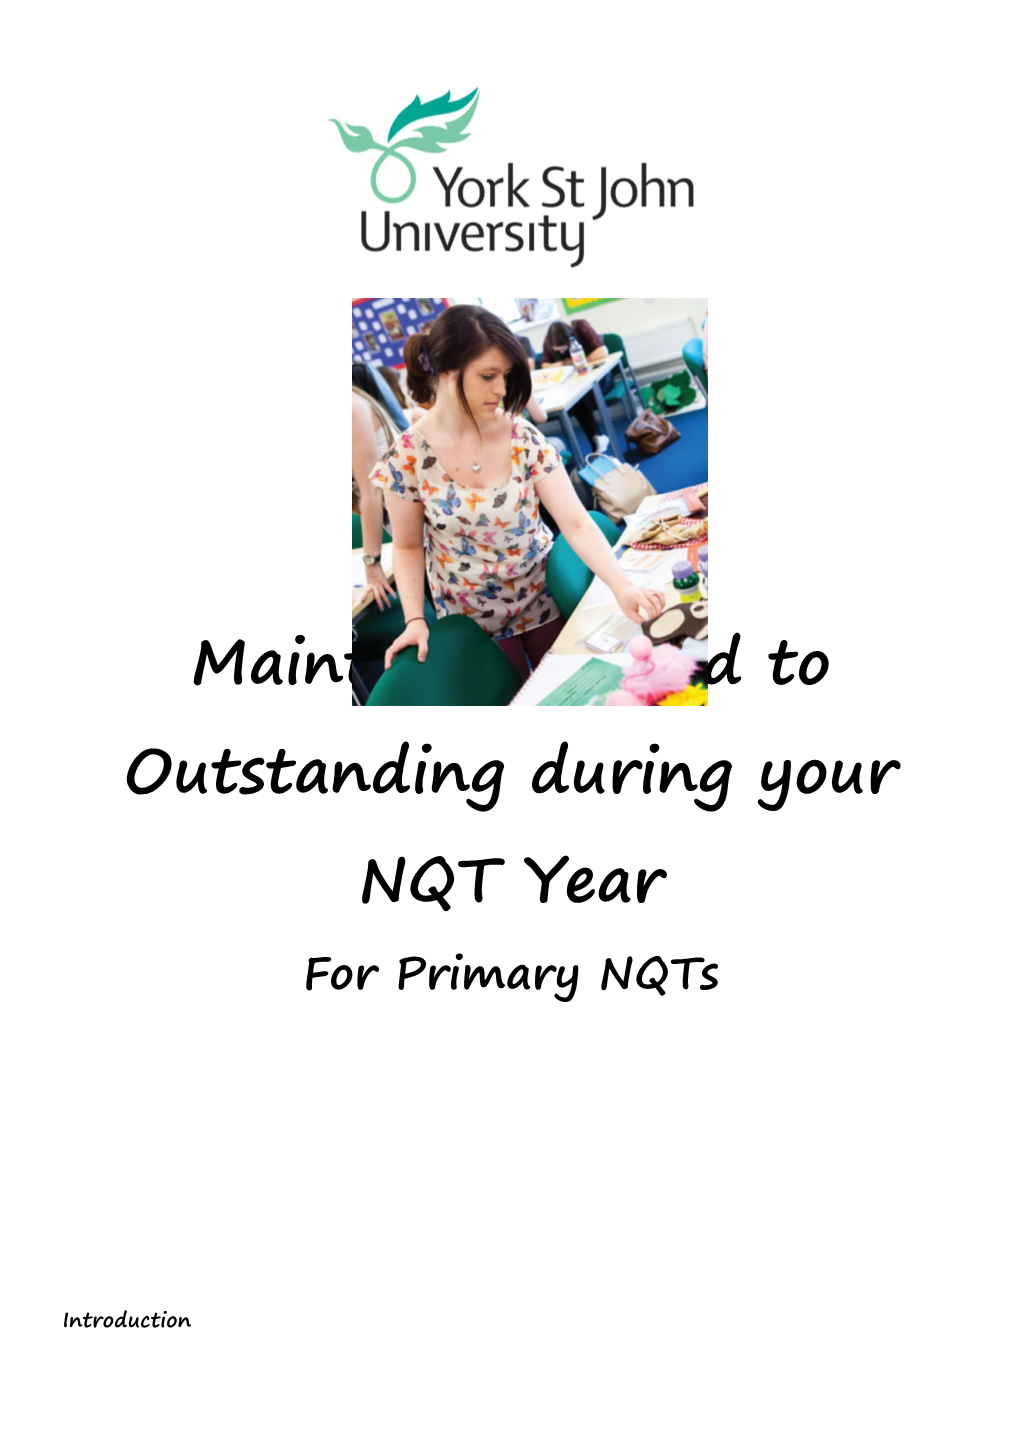 Maintaining Good to Outstanding During Your NQT Year